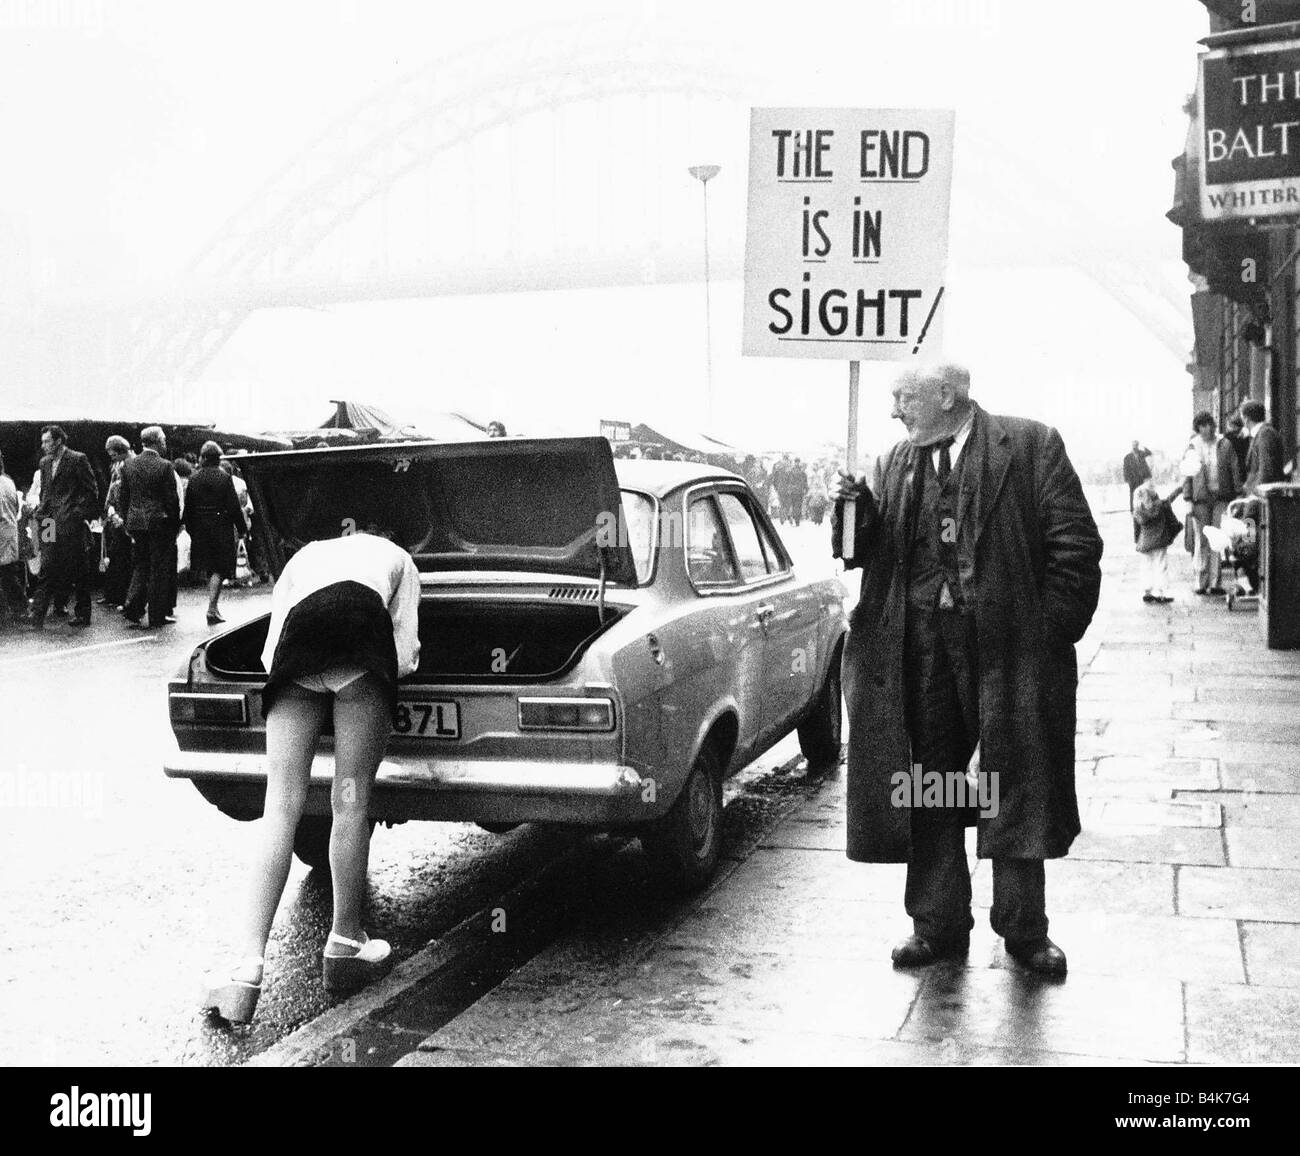 A woman is bending down leaning into the boot of her car revealing her white knickers as a old man holding a banner saying THE END IS IN SIGHT turns and looks Stock Photo